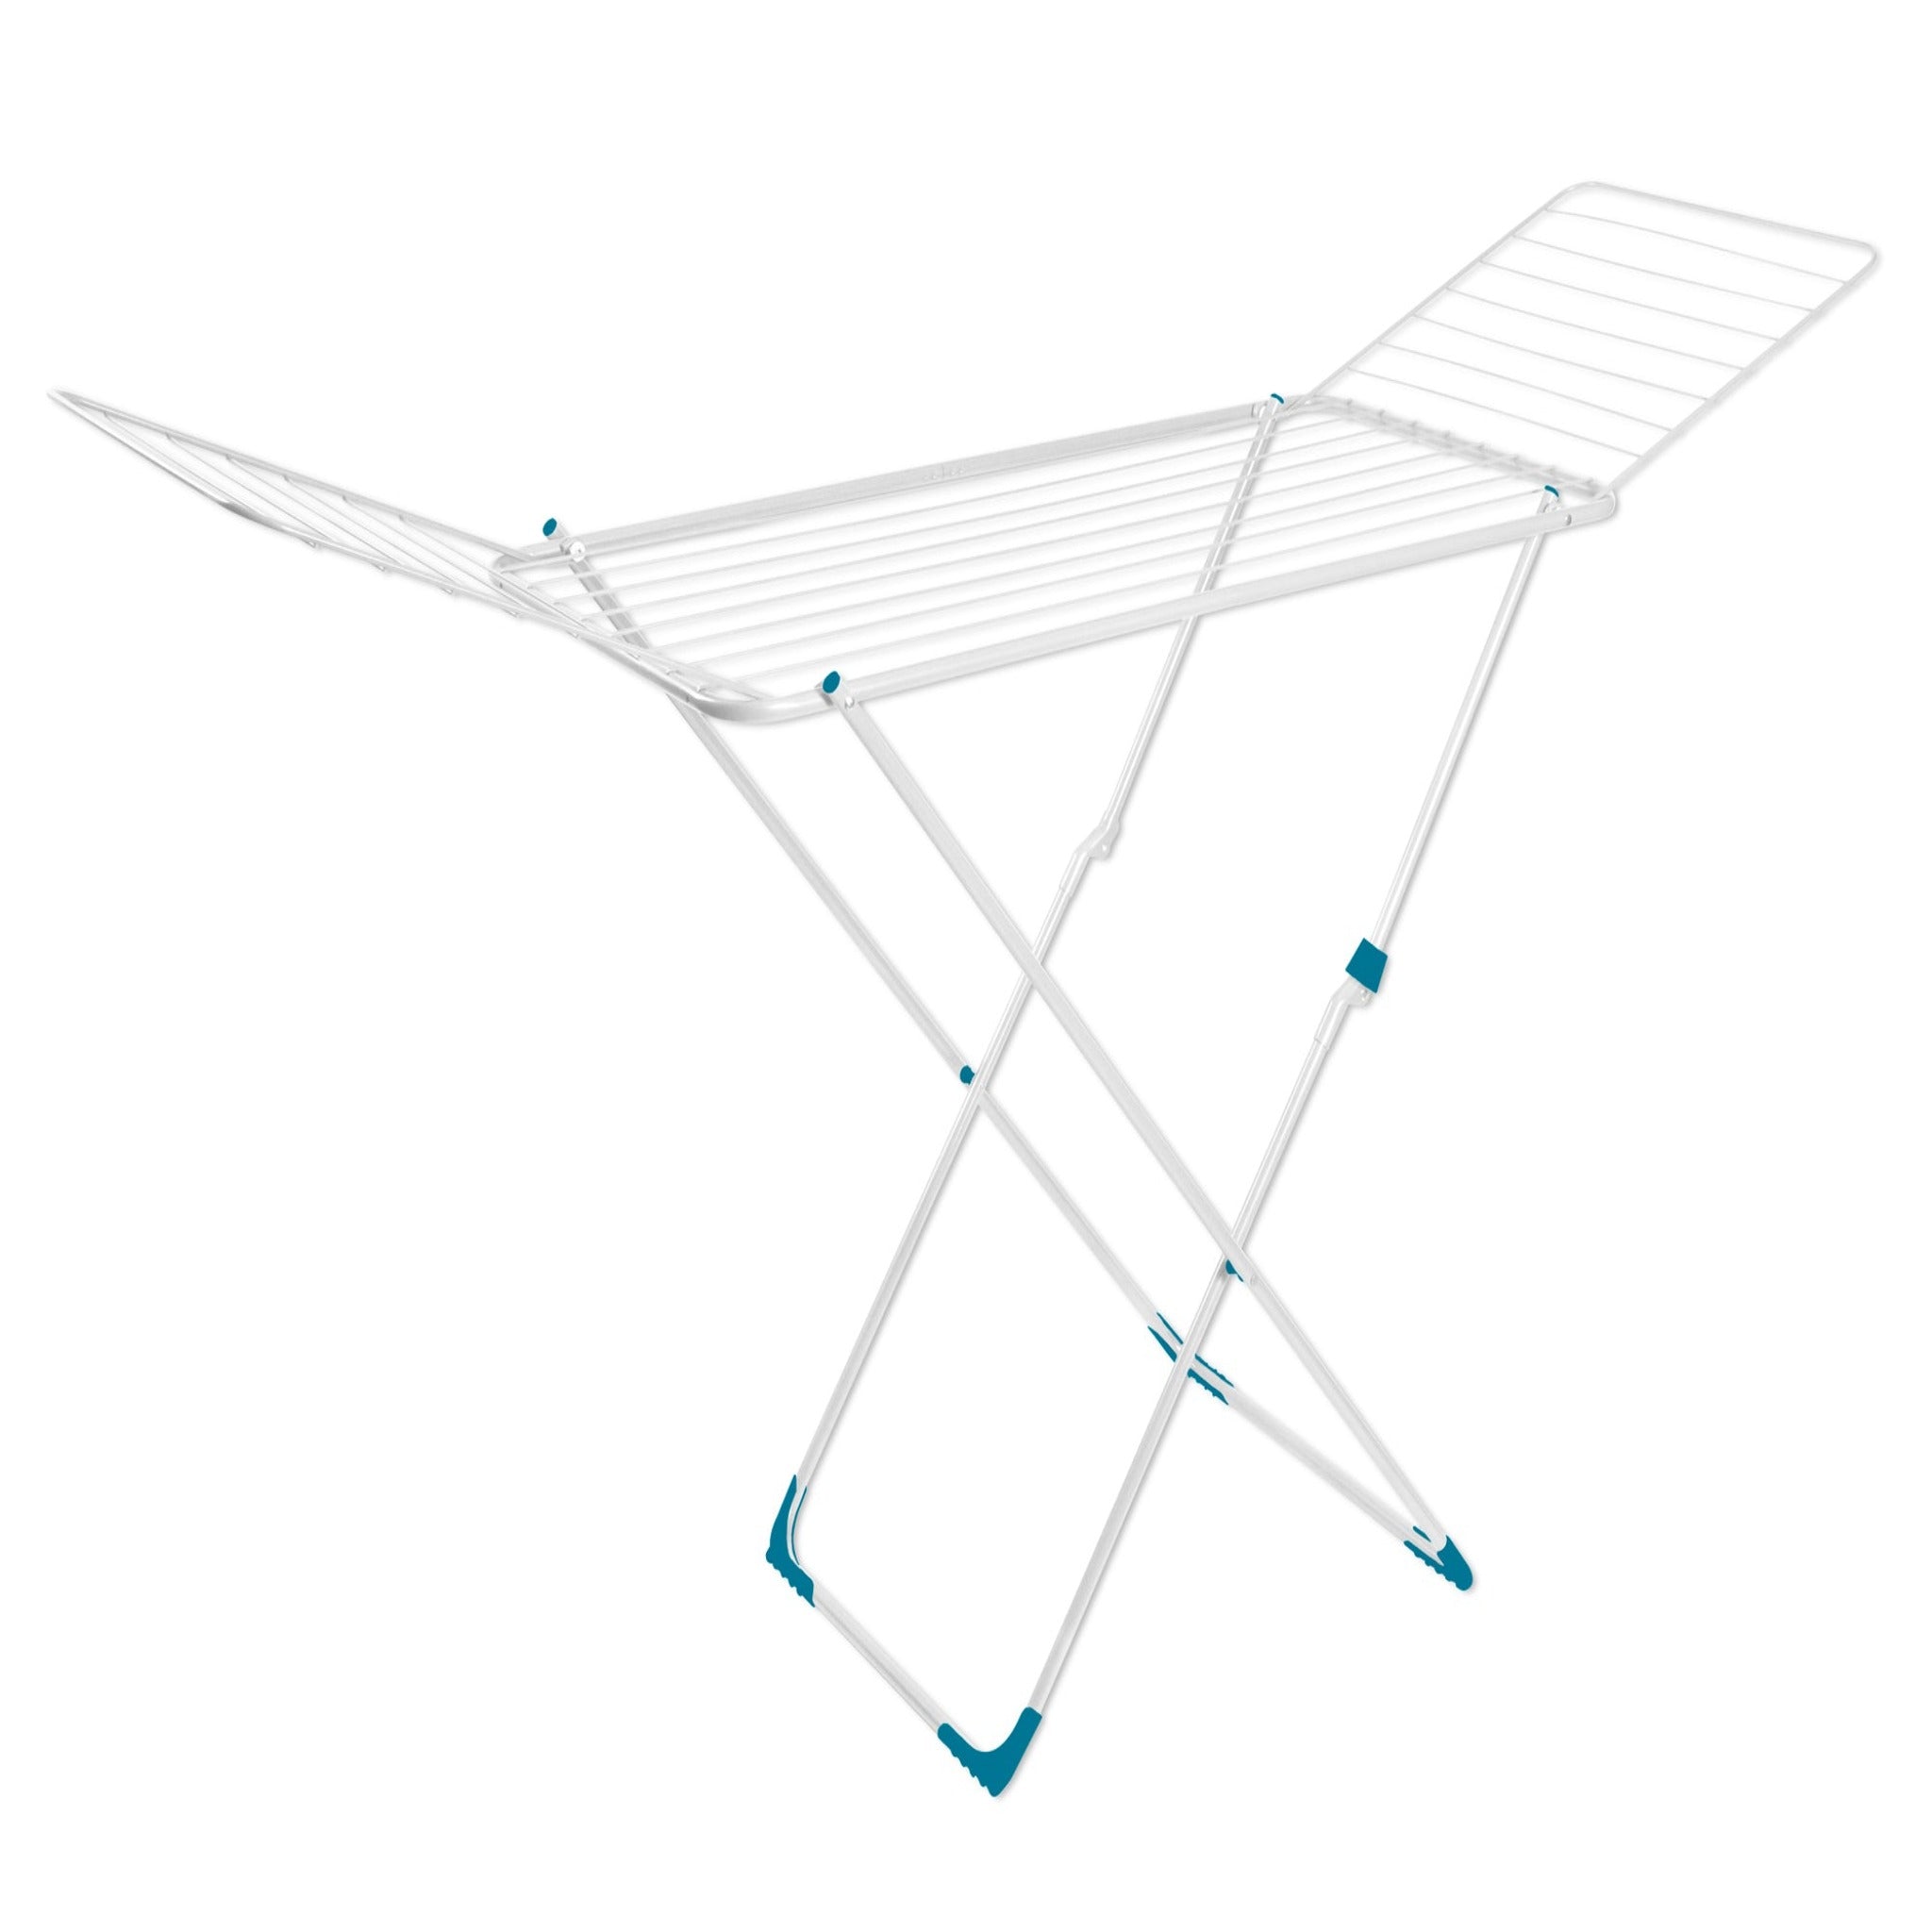 Daytek 18M Wing Laundry Clothes Airer White Blue